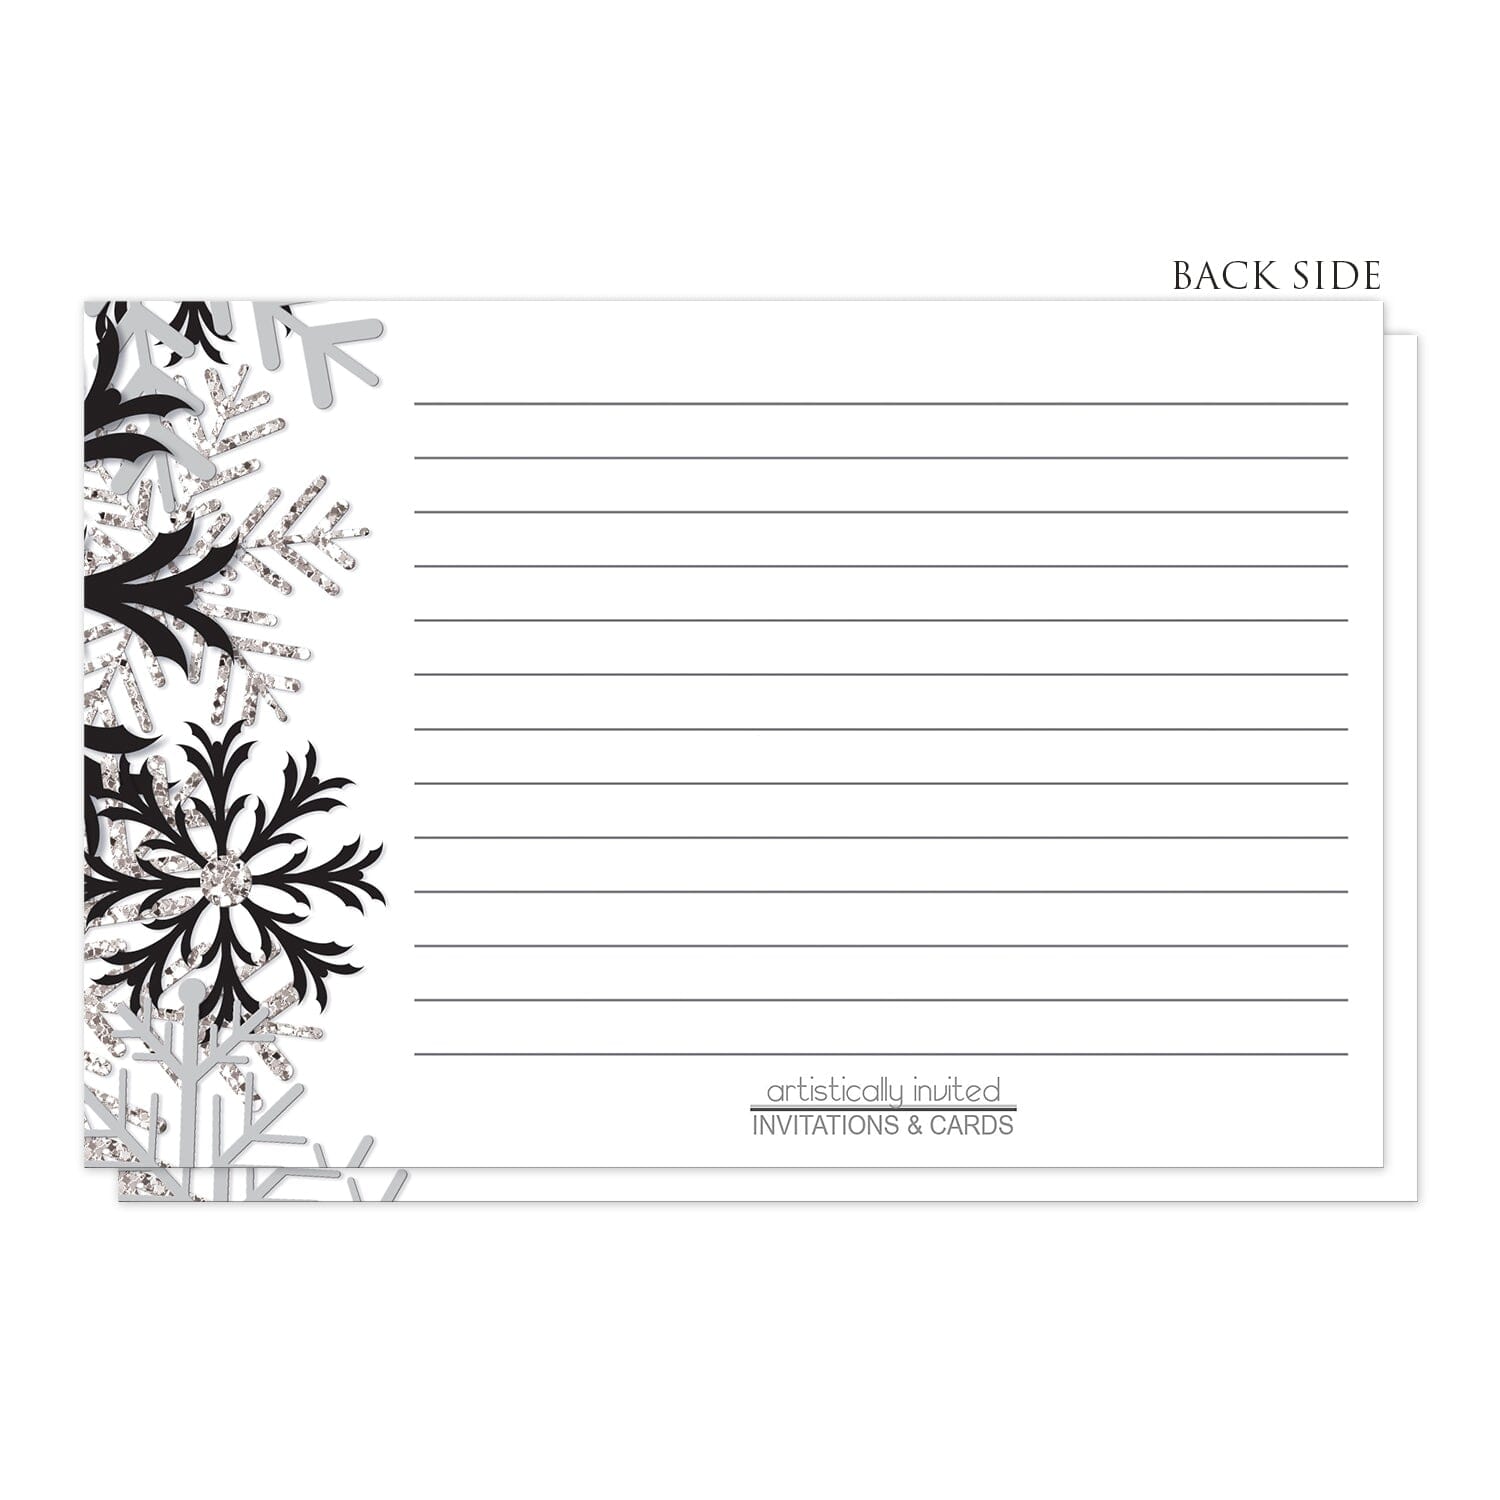 Winter Black Silver Snowflake Recipe Cards (back side) at Artistically Invited.